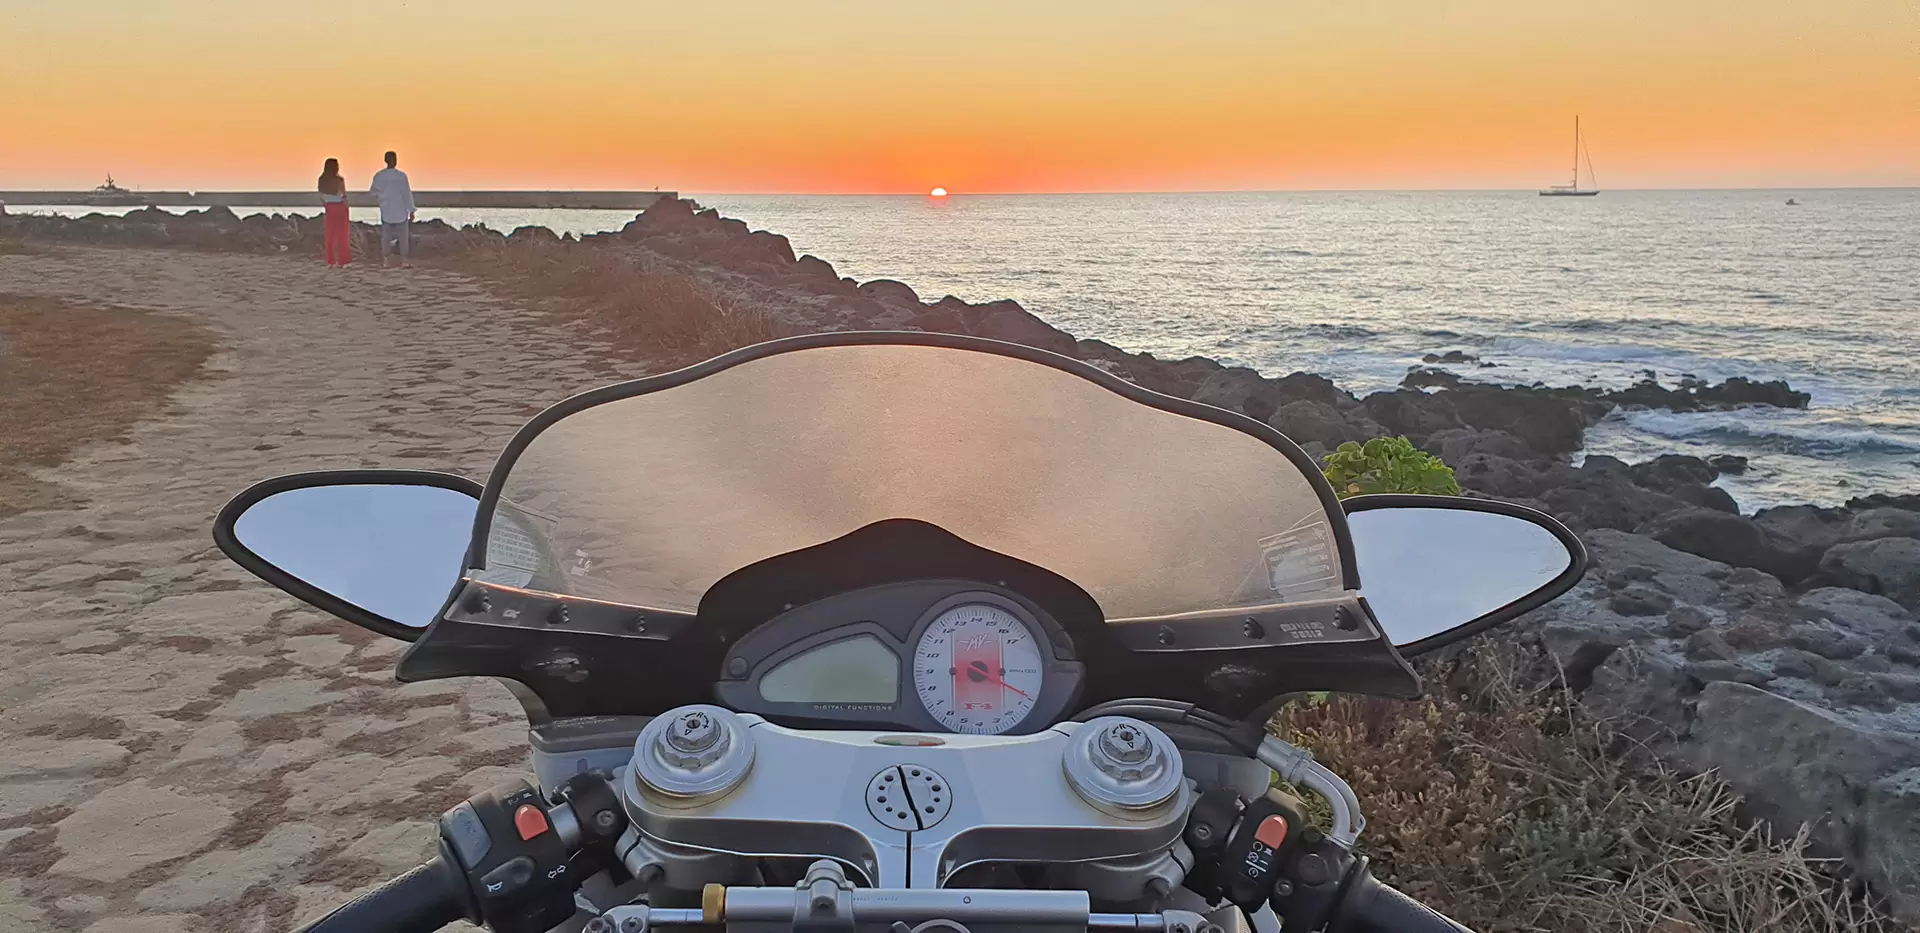 Pantelleria by scooter or motorbike? Perfect!